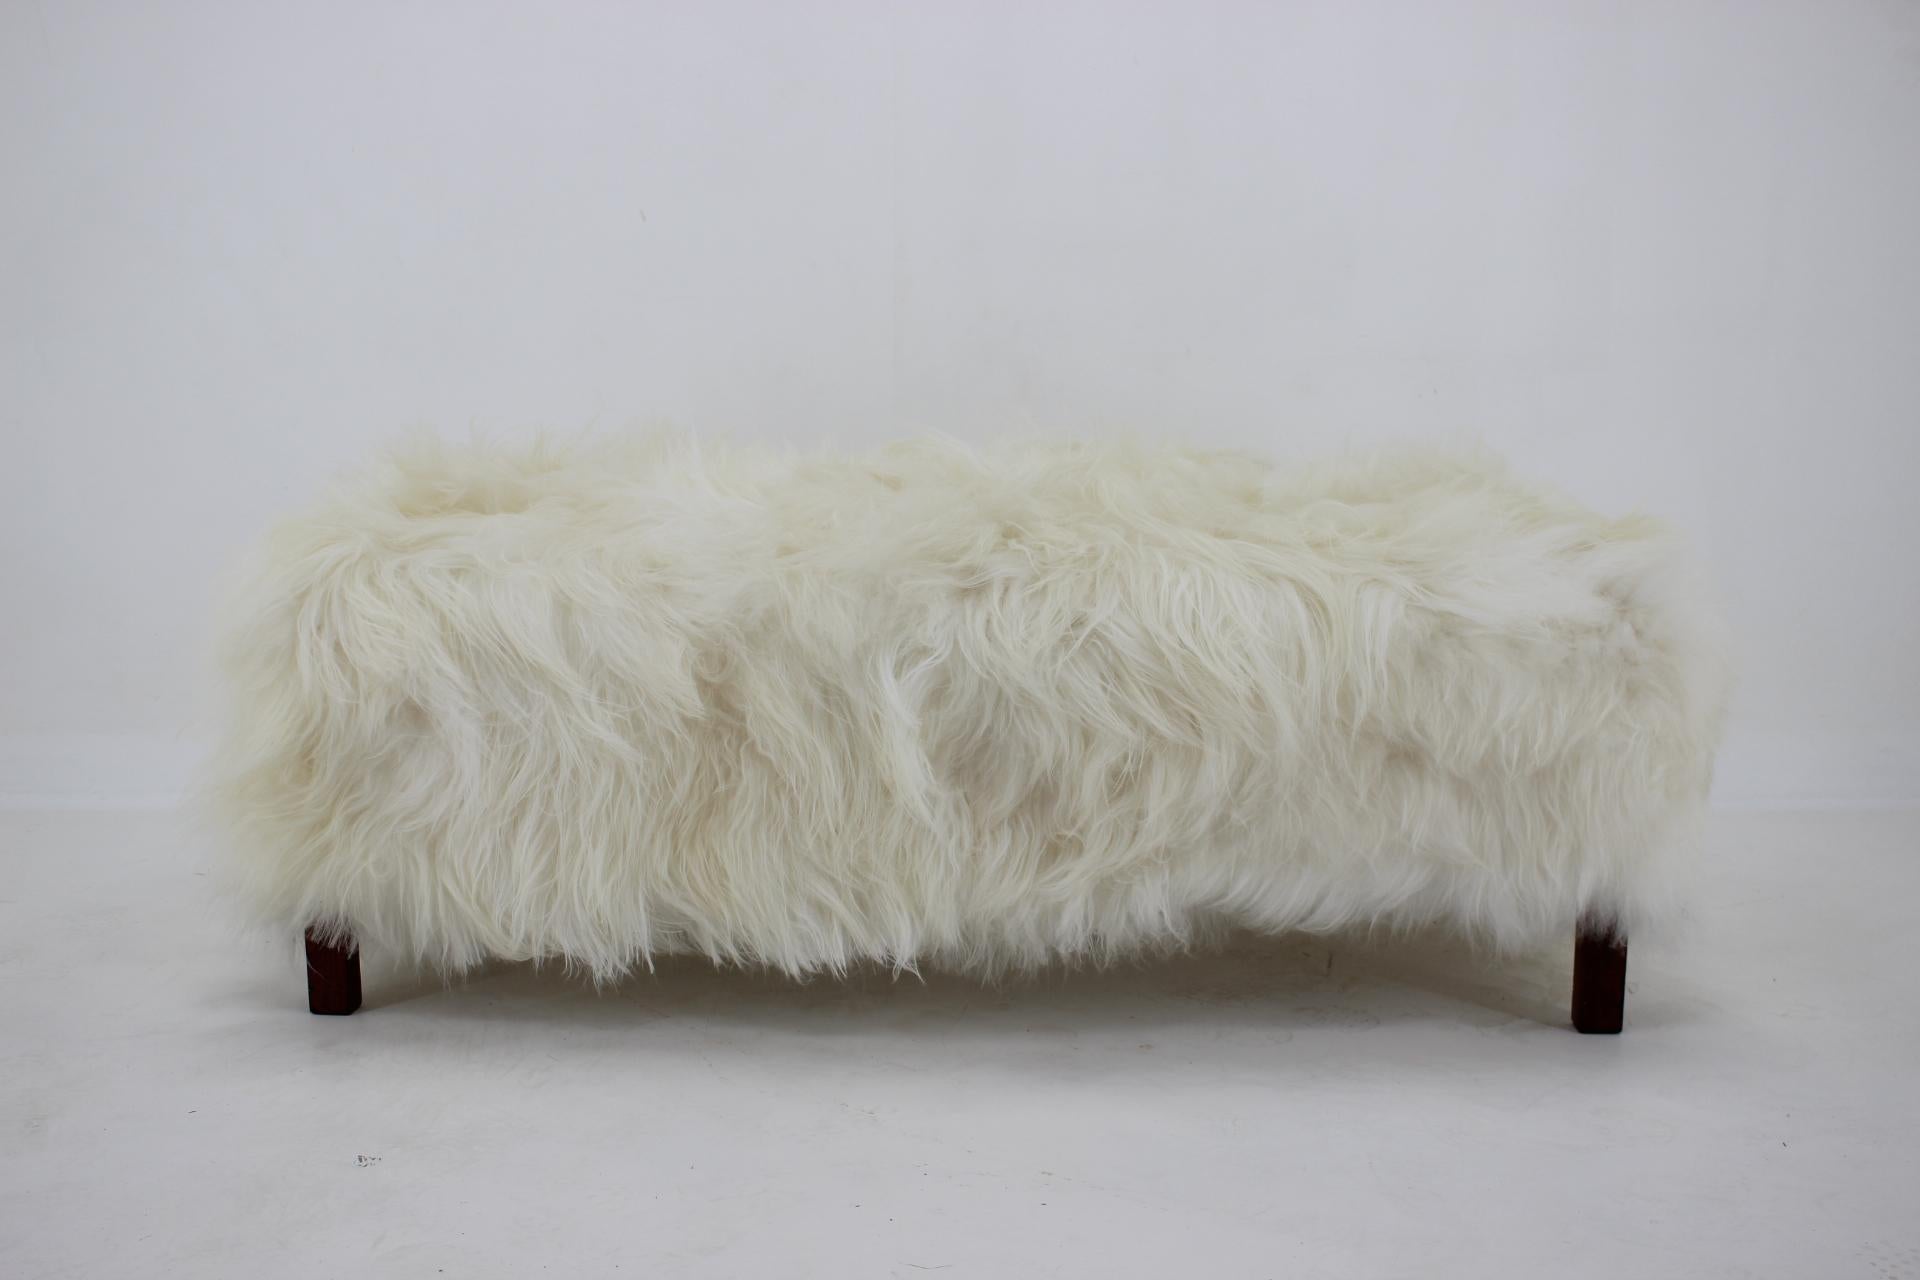 - Newly upholstered in exclusive fine sheepskin from Island sheep’s
- The springs and padding were repaired in old technique.